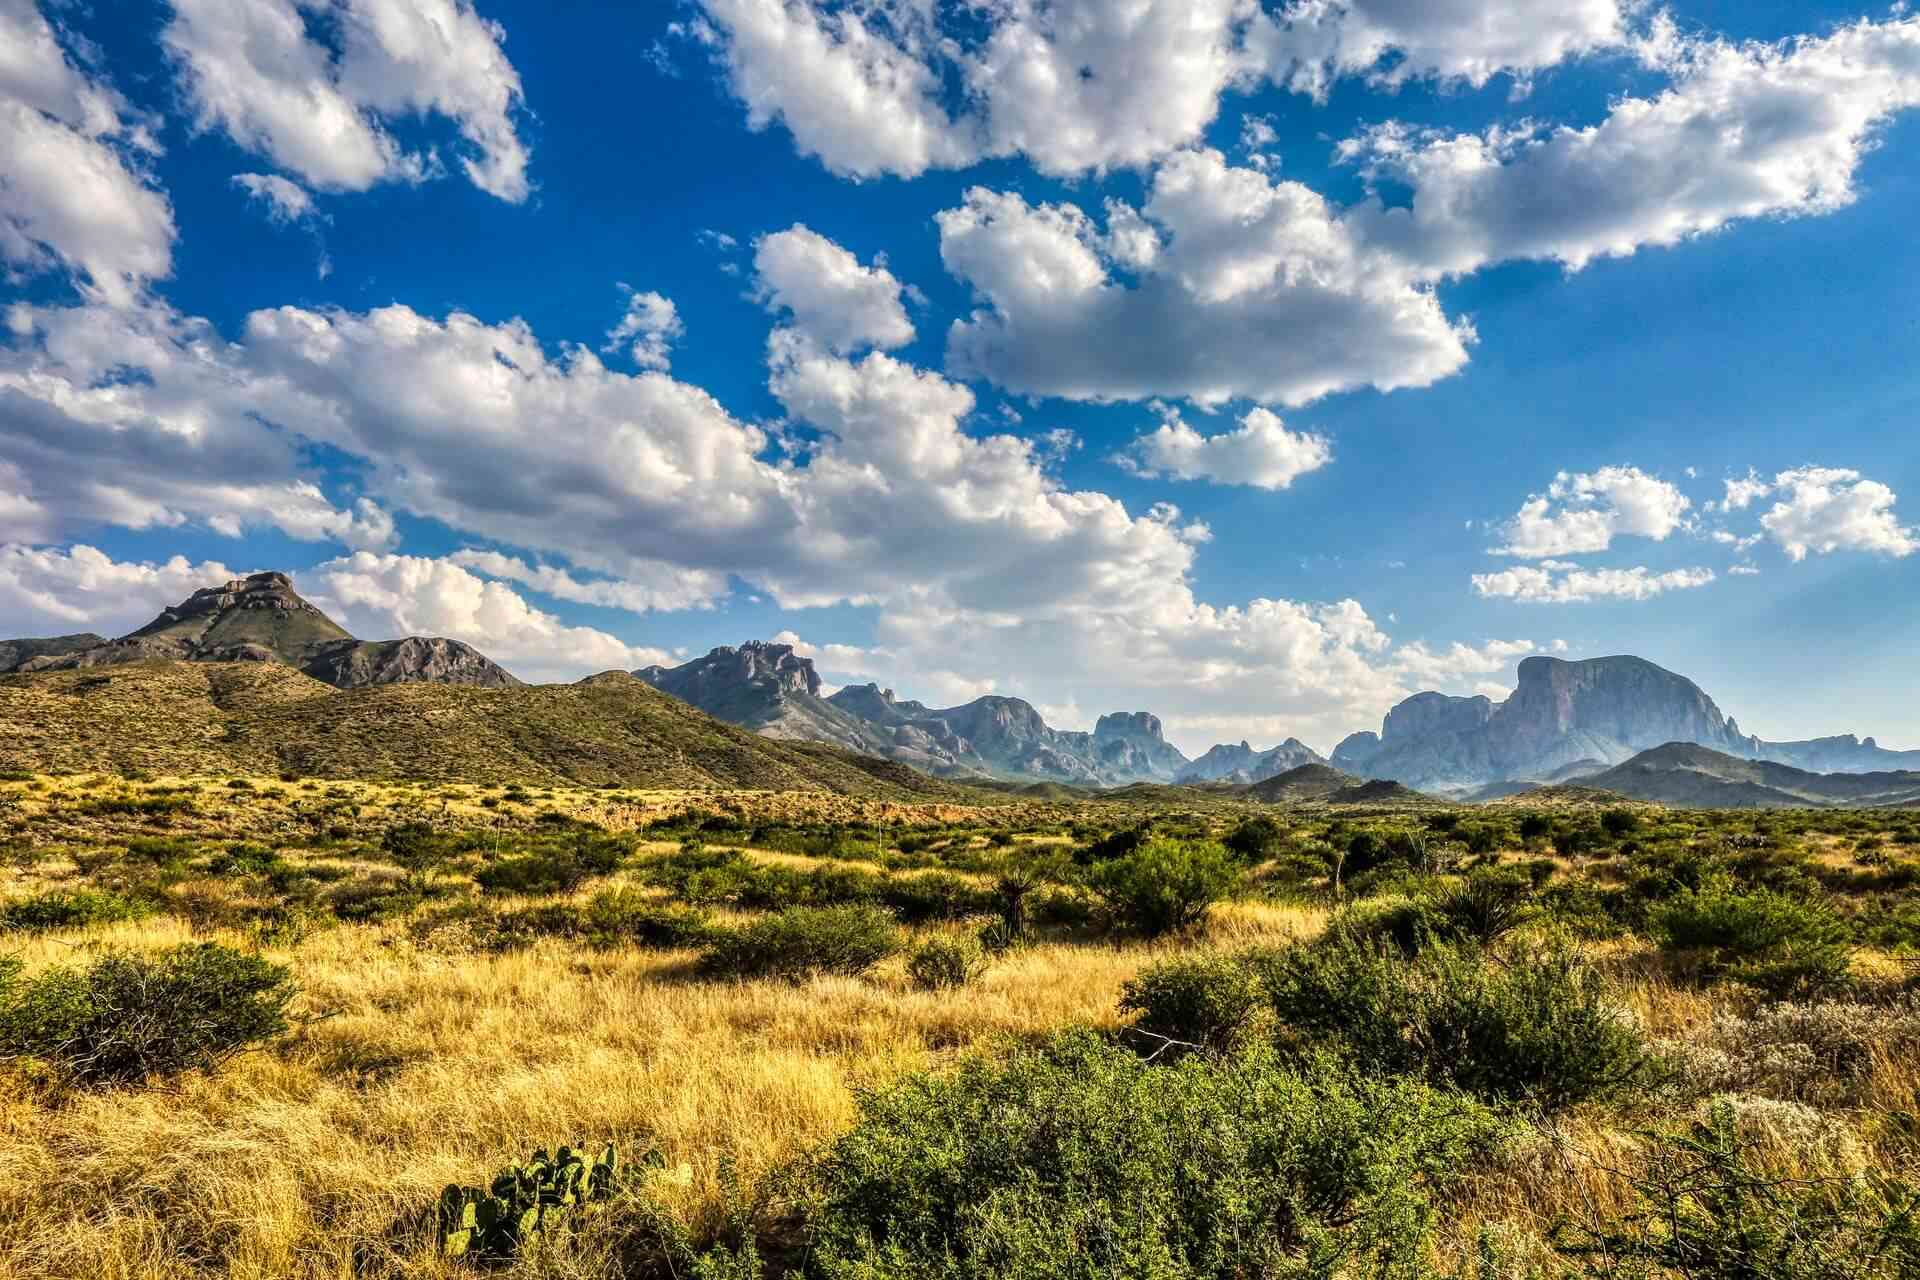 A beautiful landscape of the Big Bend National Park